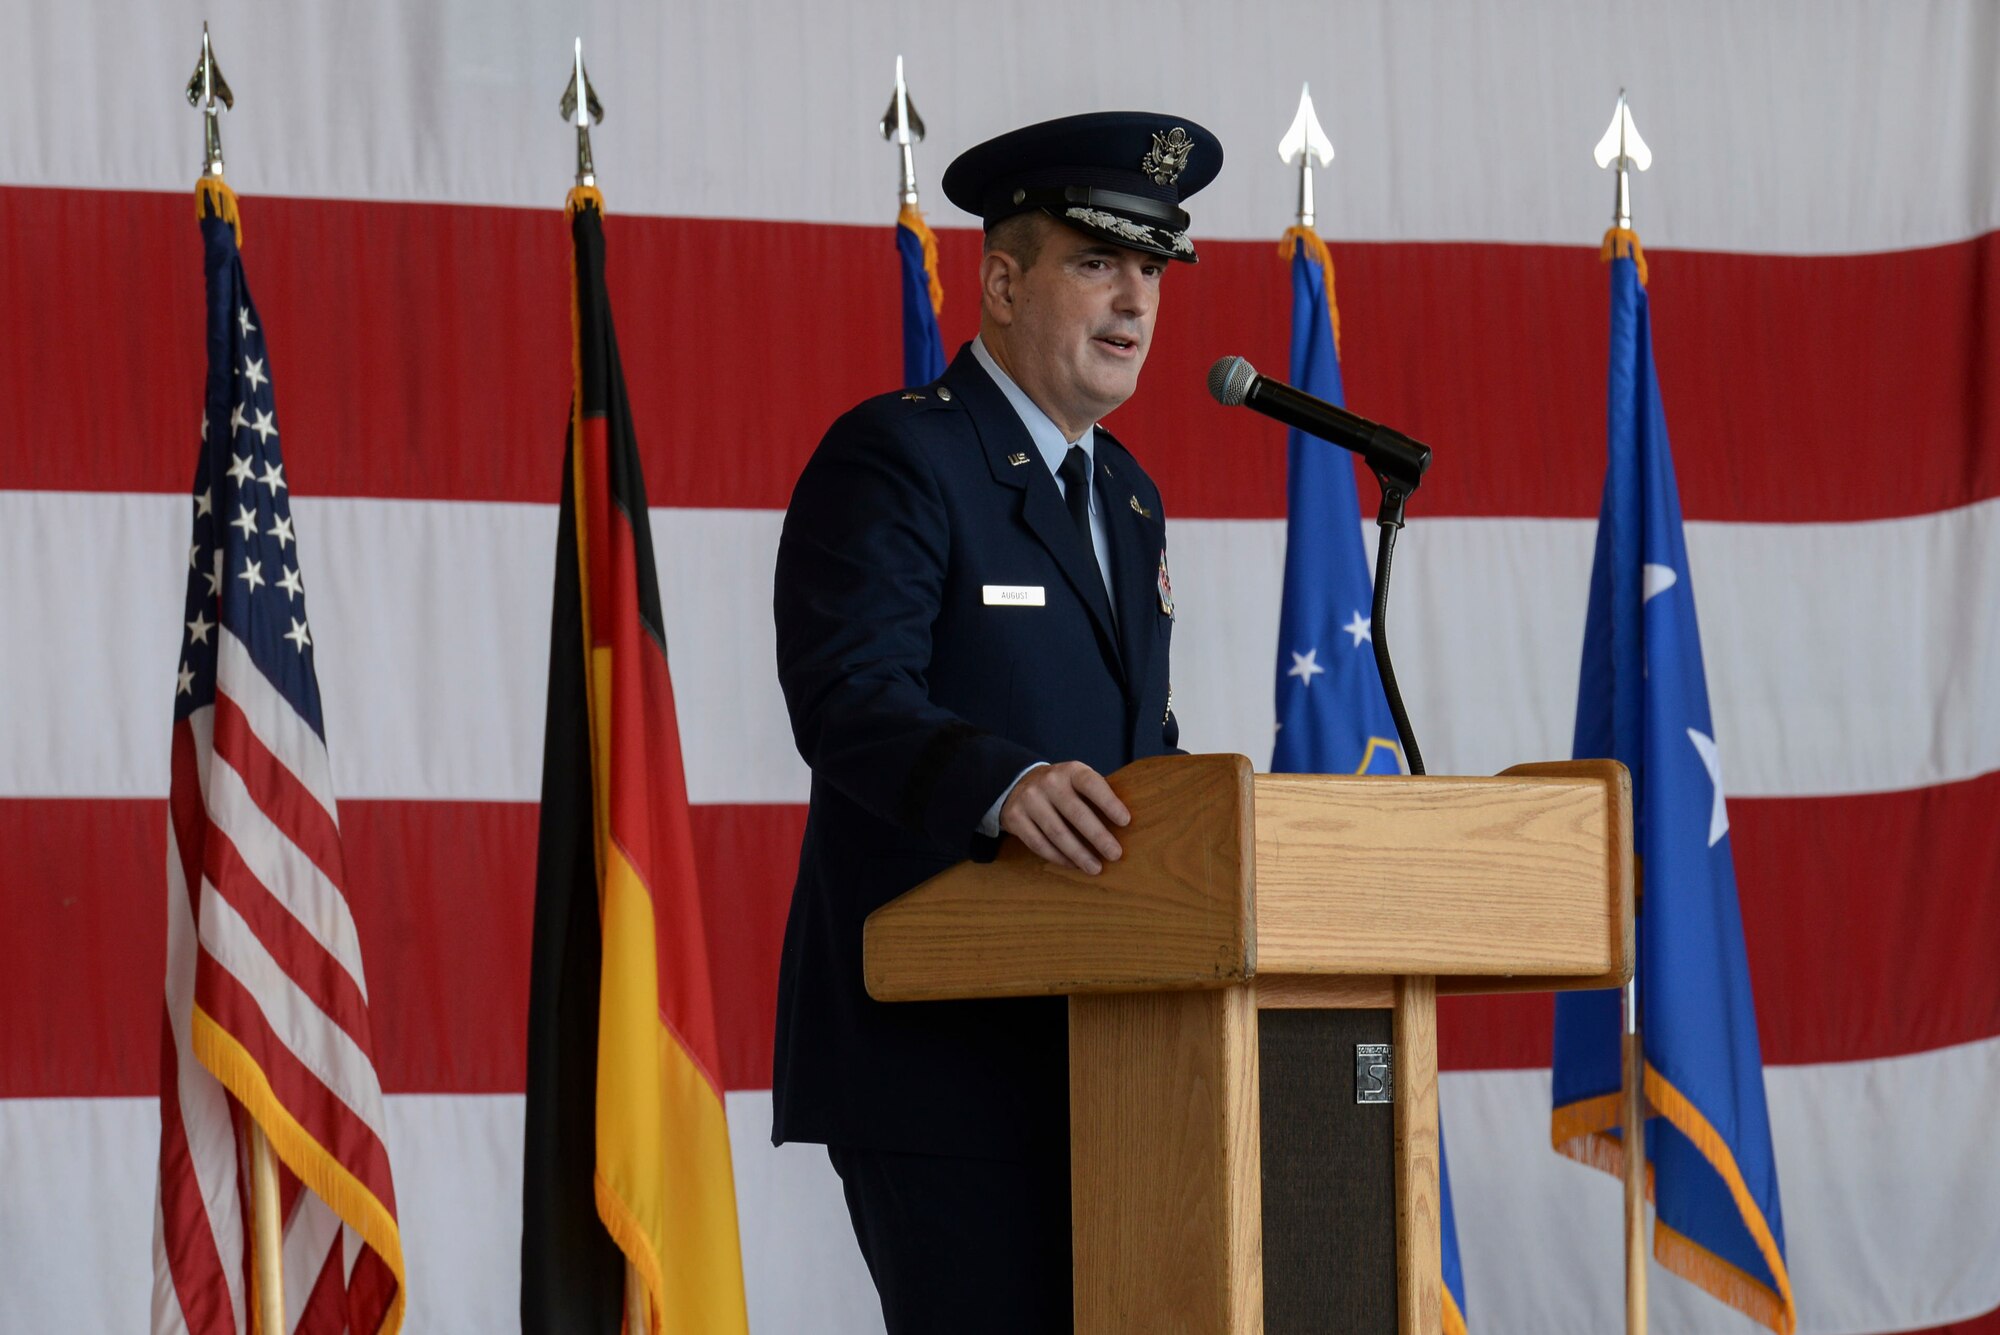 The men and women of the 86th Airlift Wing welcomed their new commander, Brig. Gen. Mark R. August, Aug. 9, 2018.